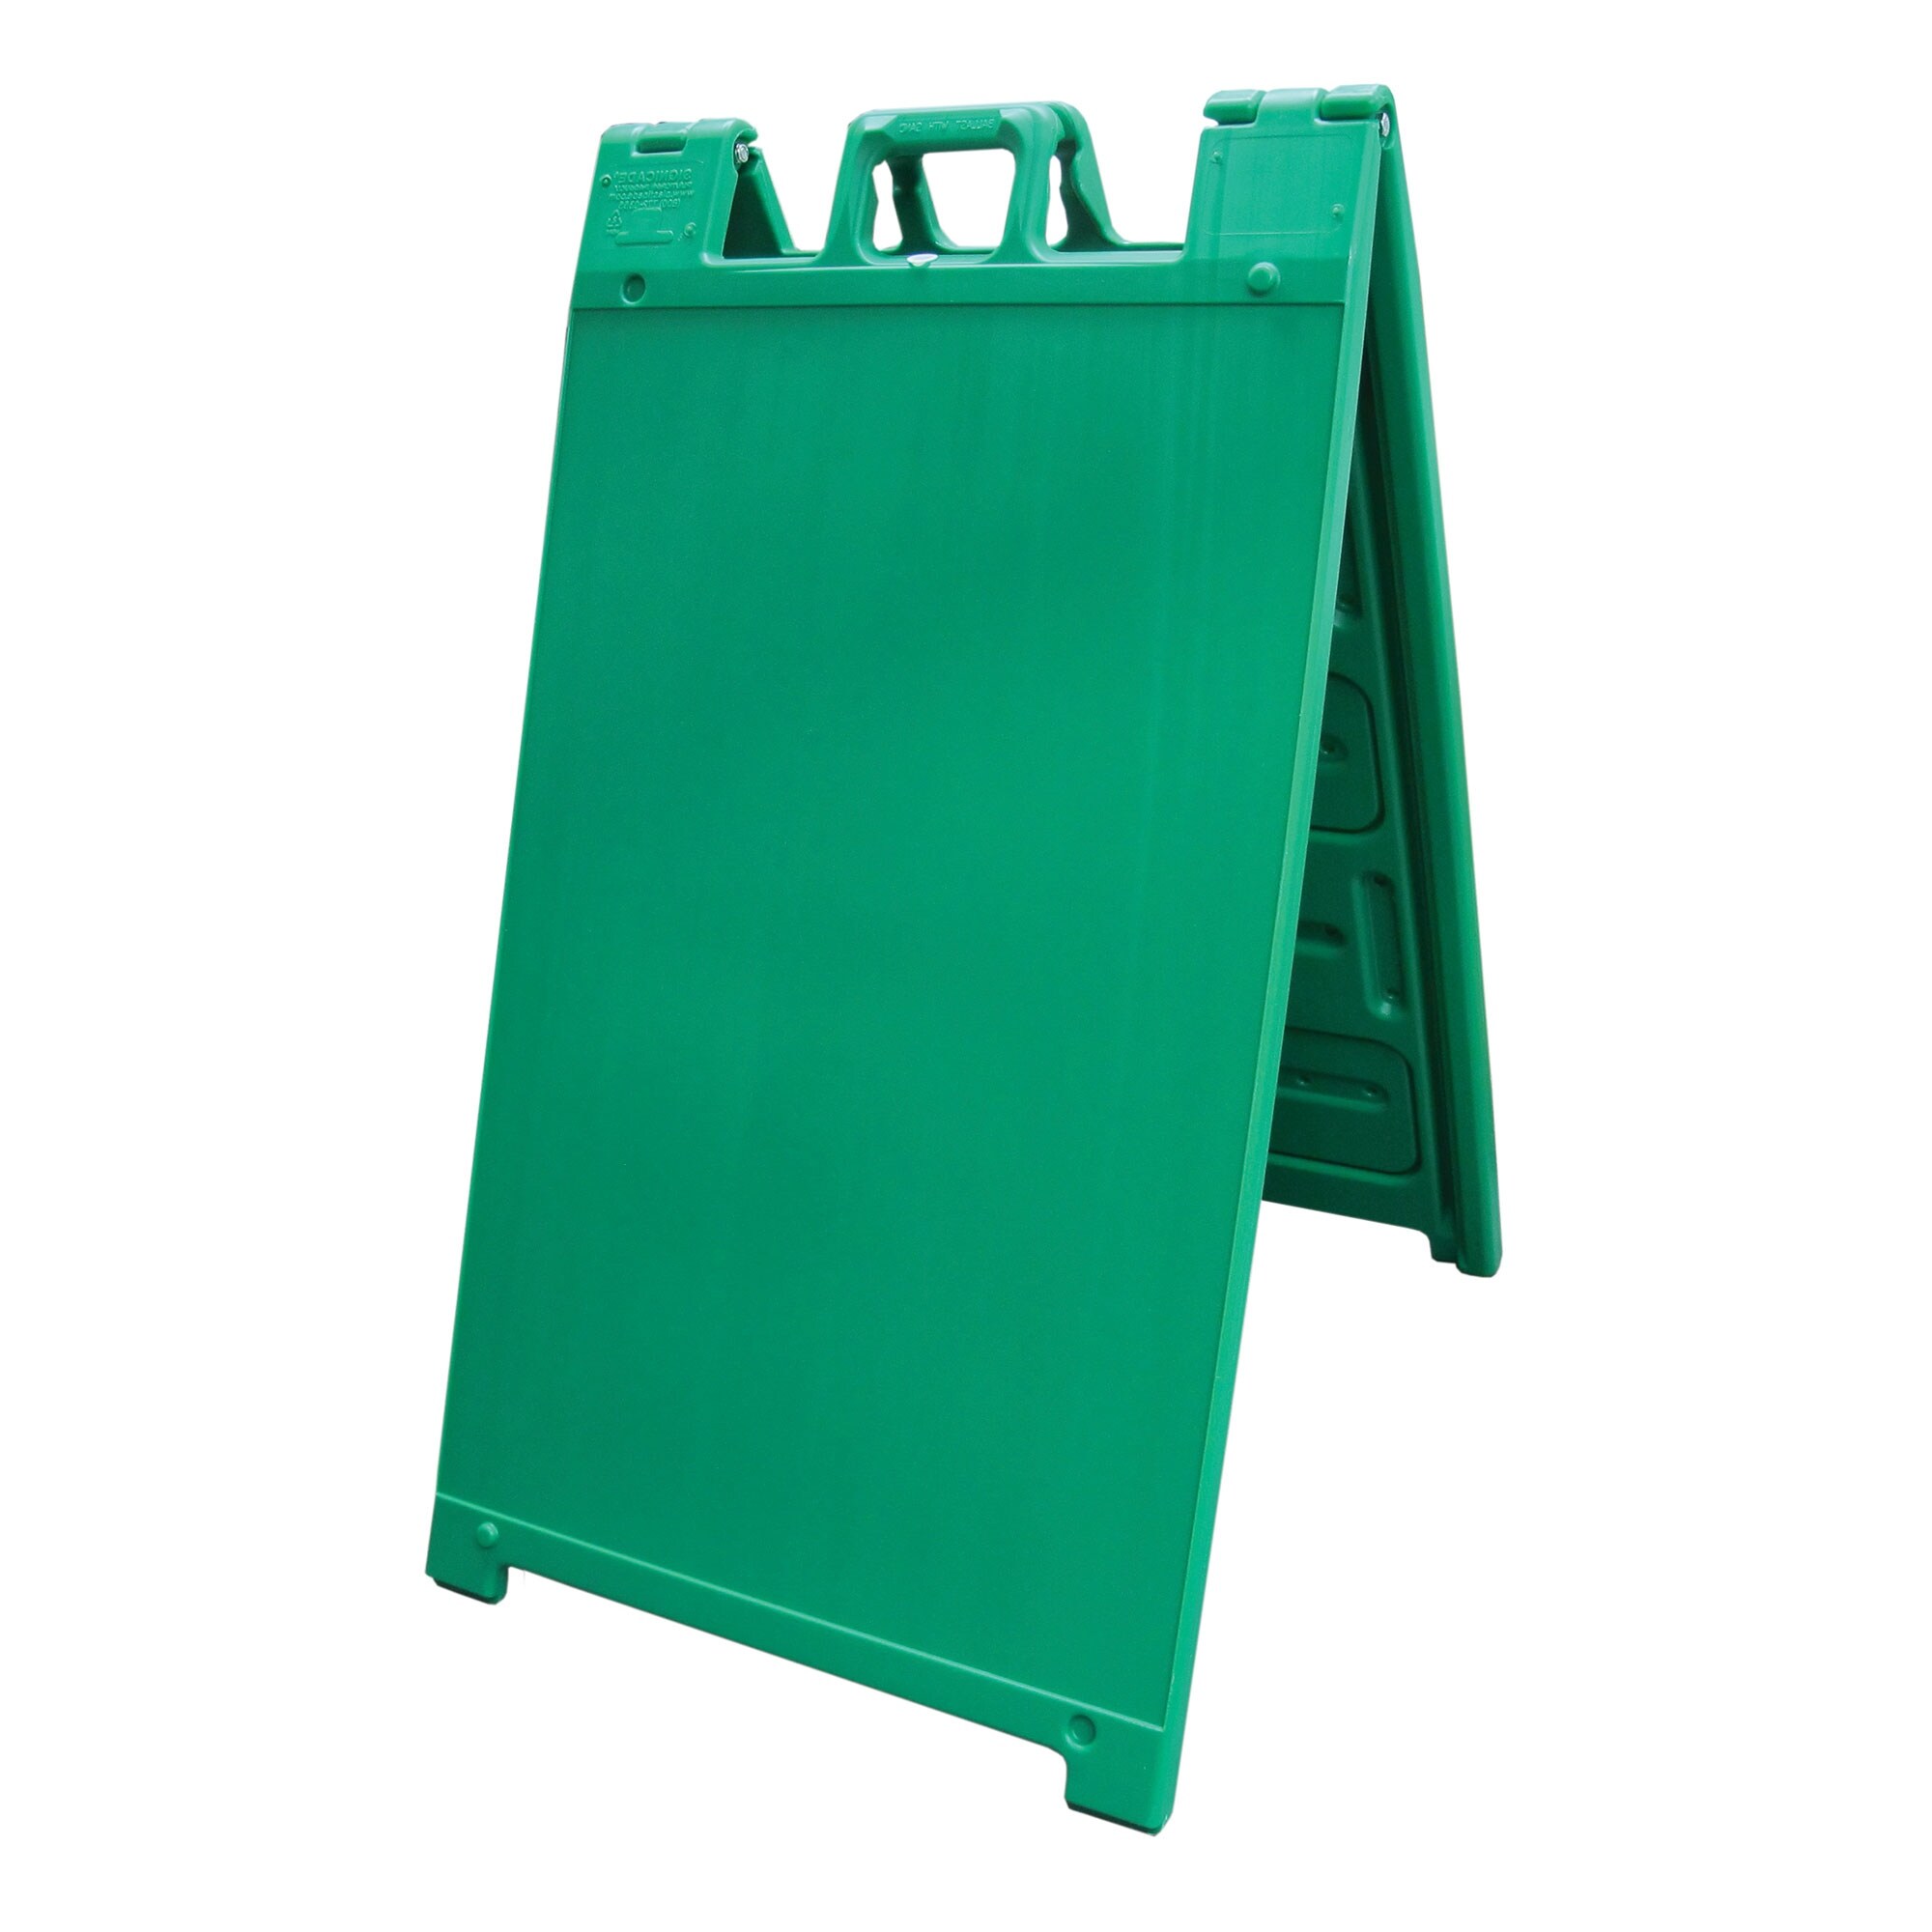 Plasticade Signicade Portable Folding Sidewalk Double Sided Sign Stand,  Green Bed Bath  Beyond 36928770